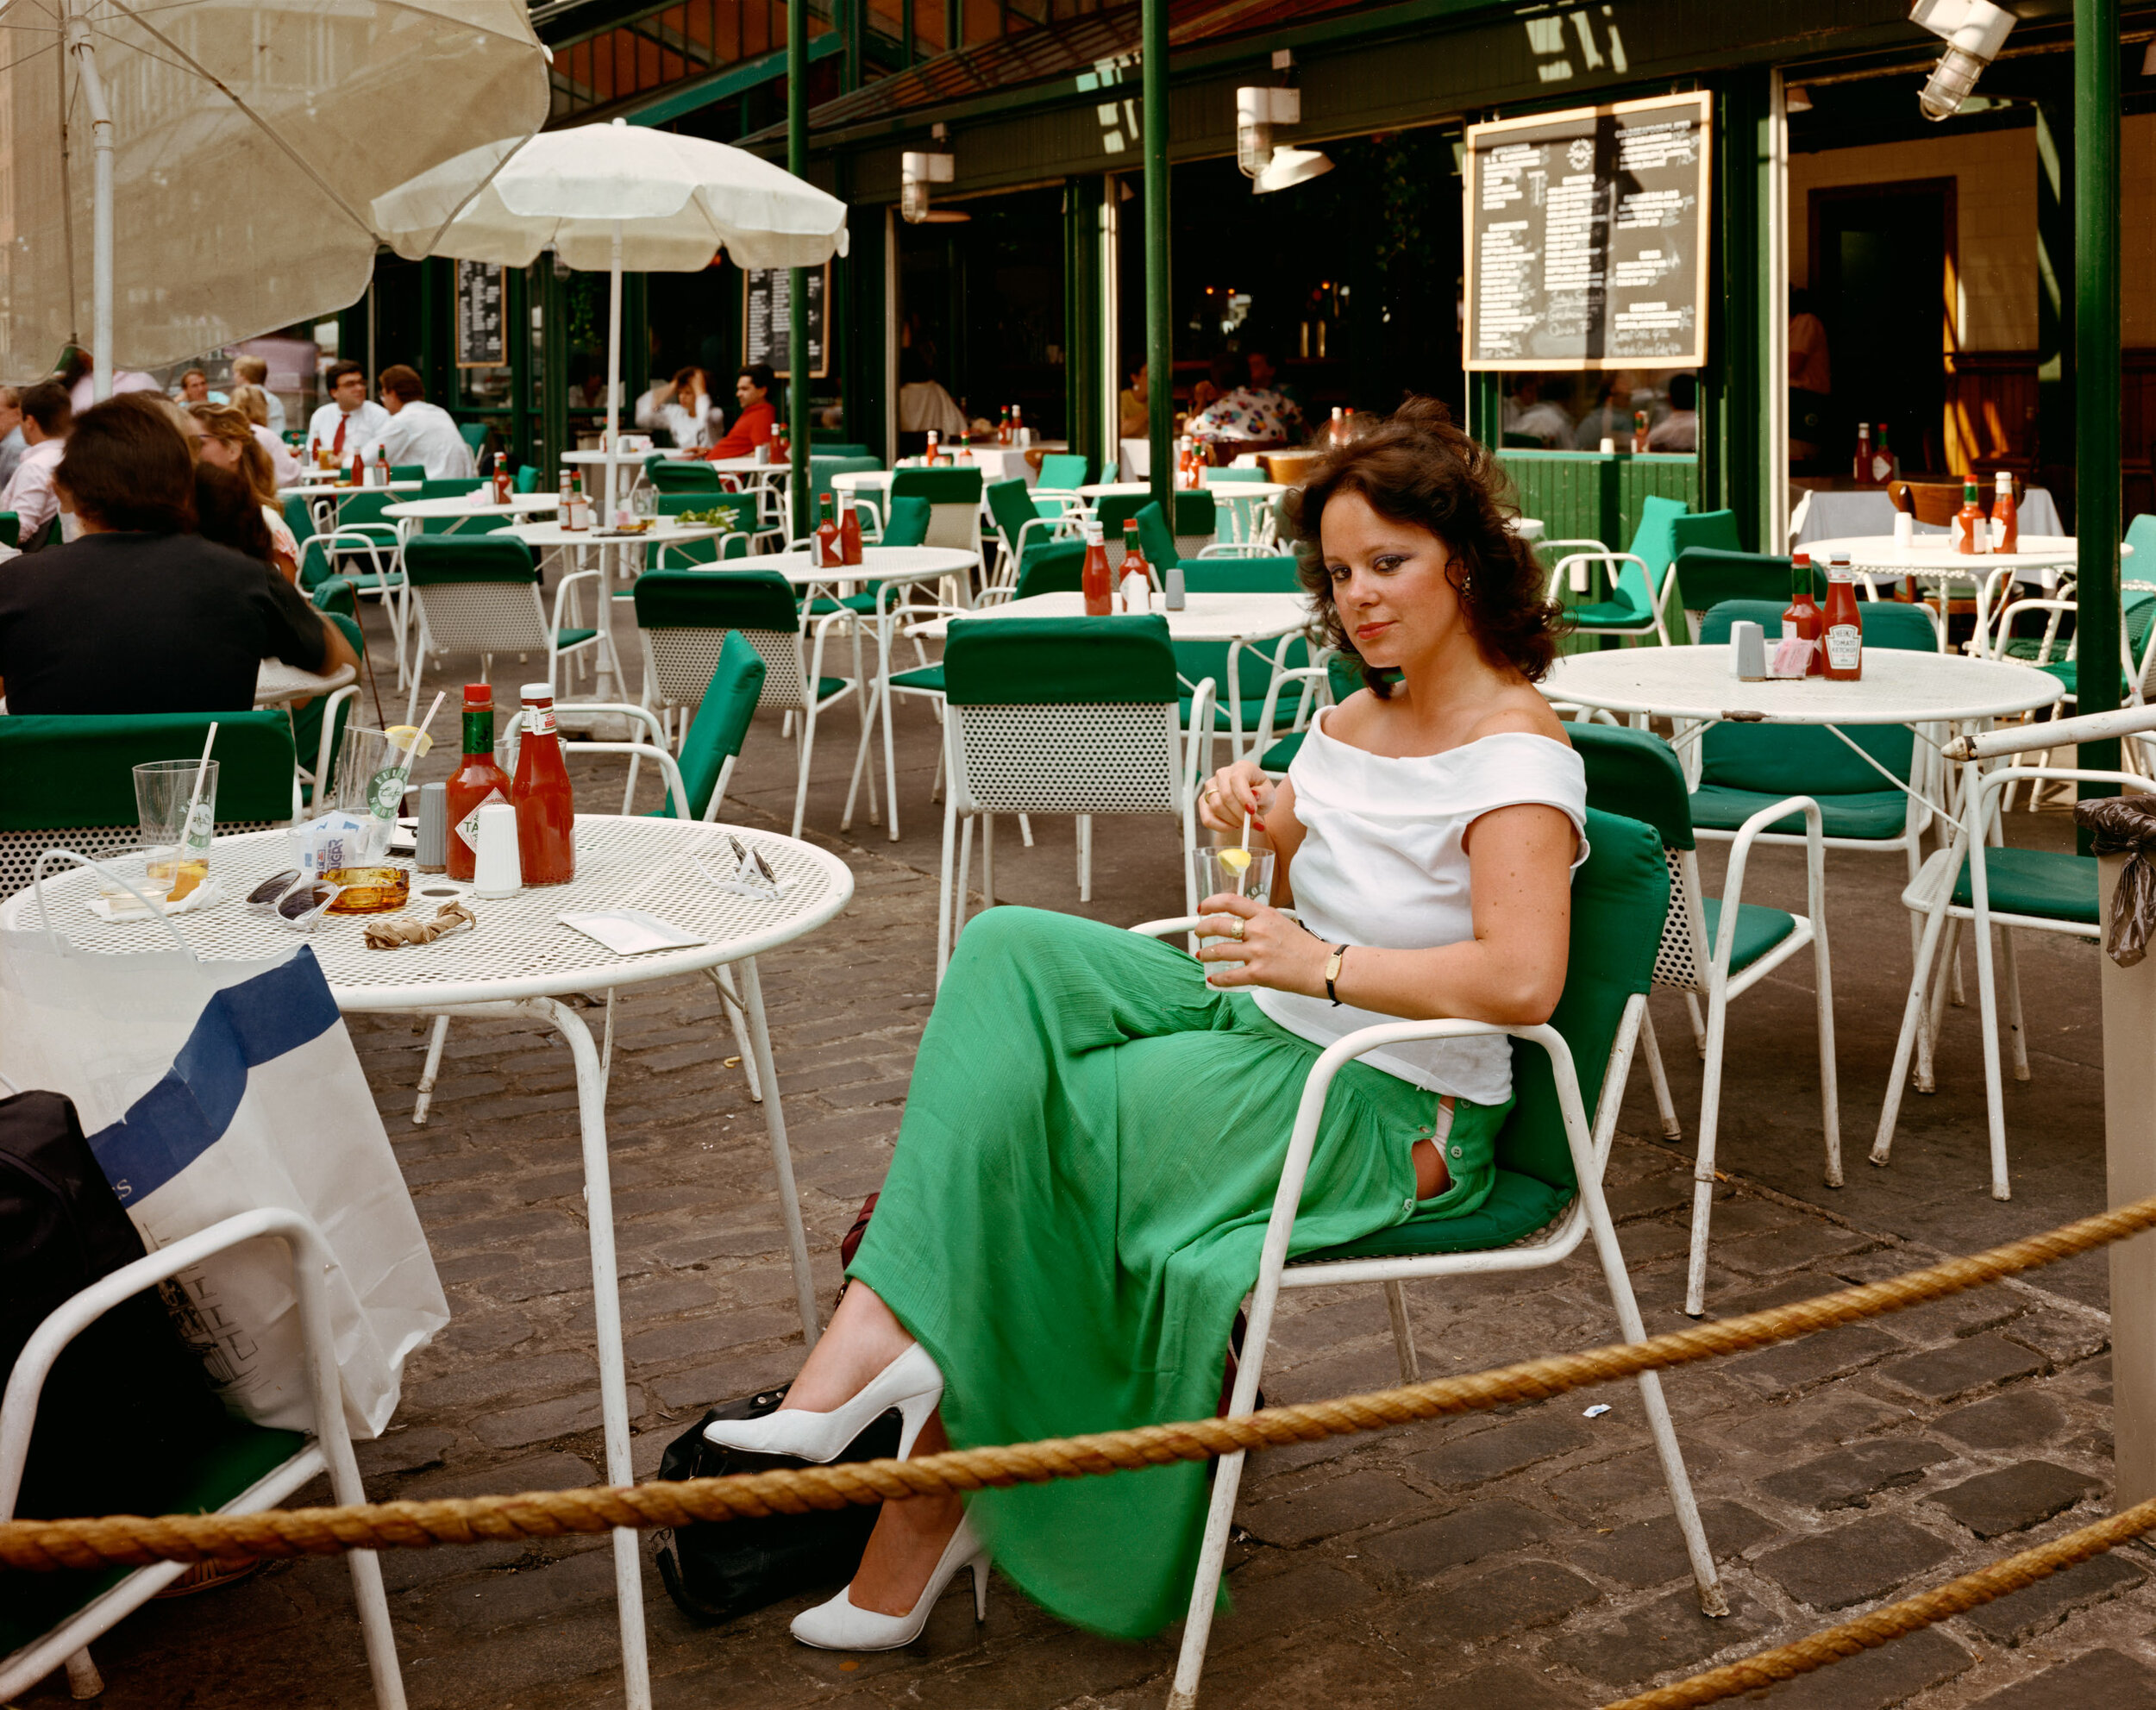 A Tourist at the South Street Seaport, New York, New York, July 1987